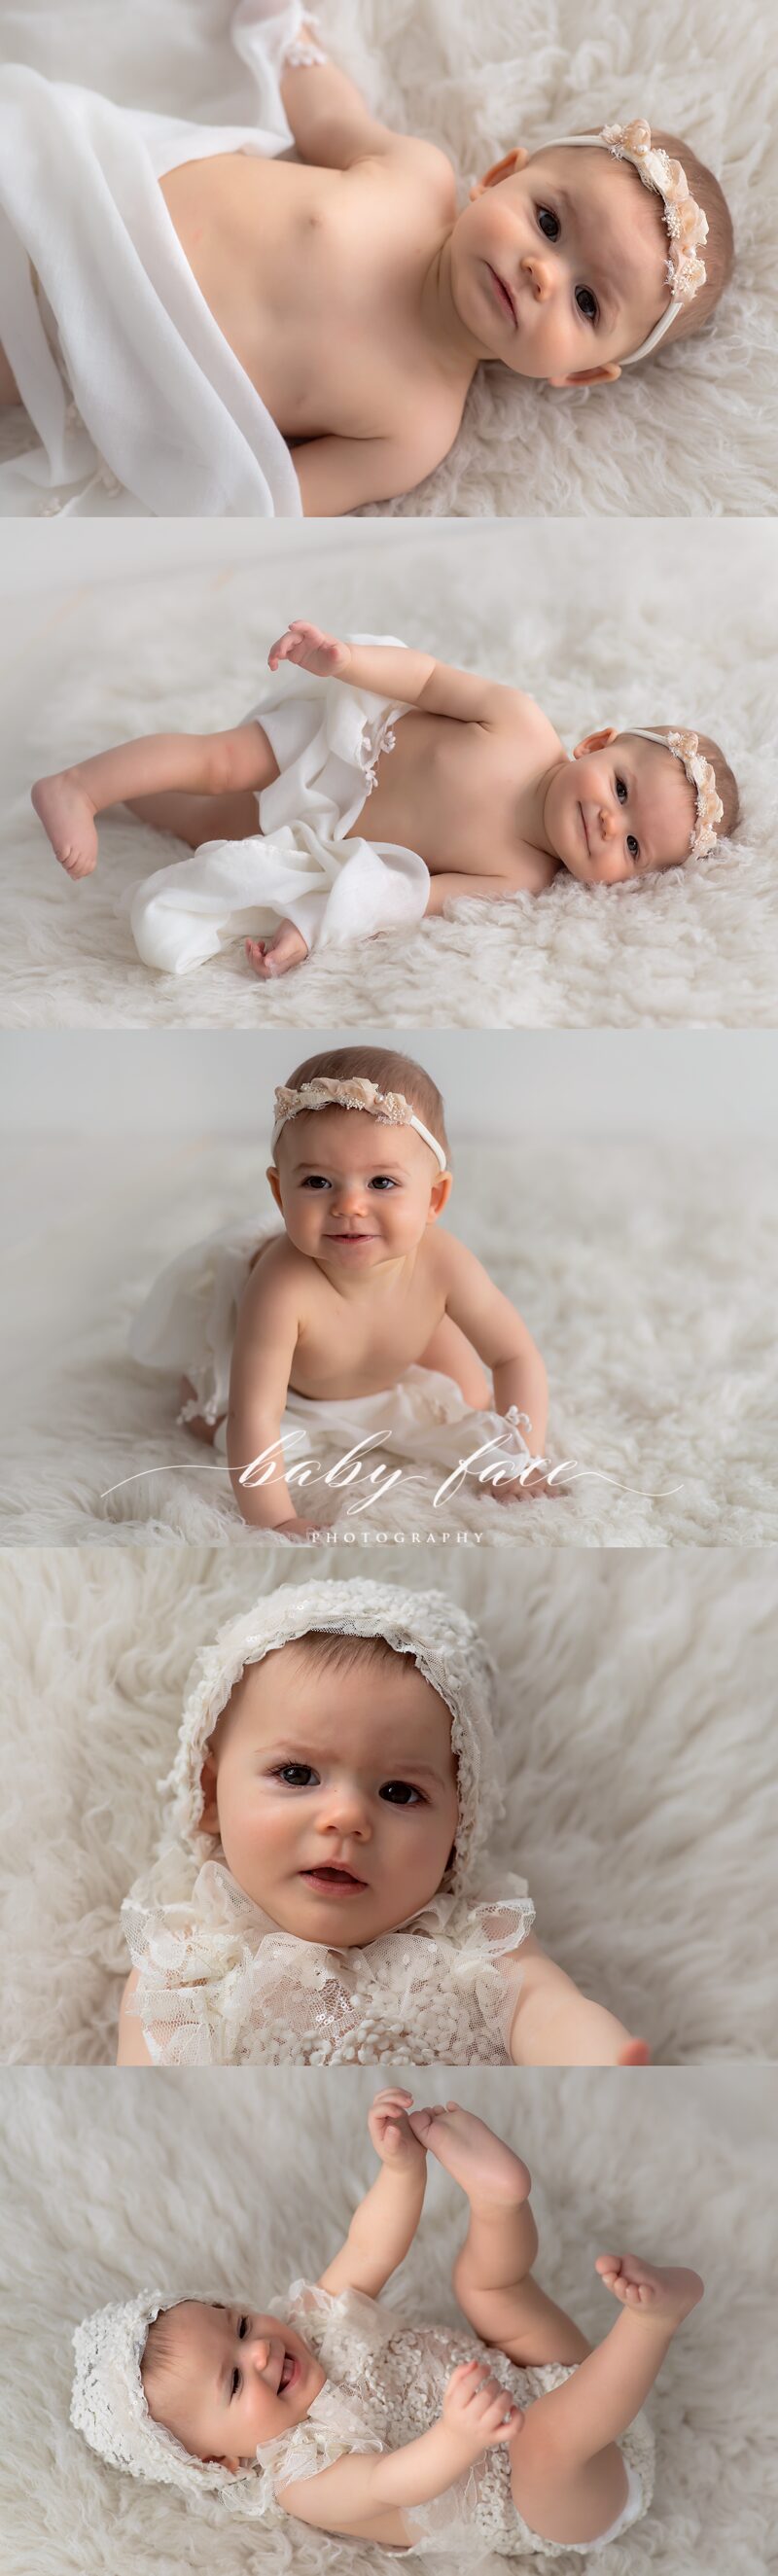 baby photography sitter session